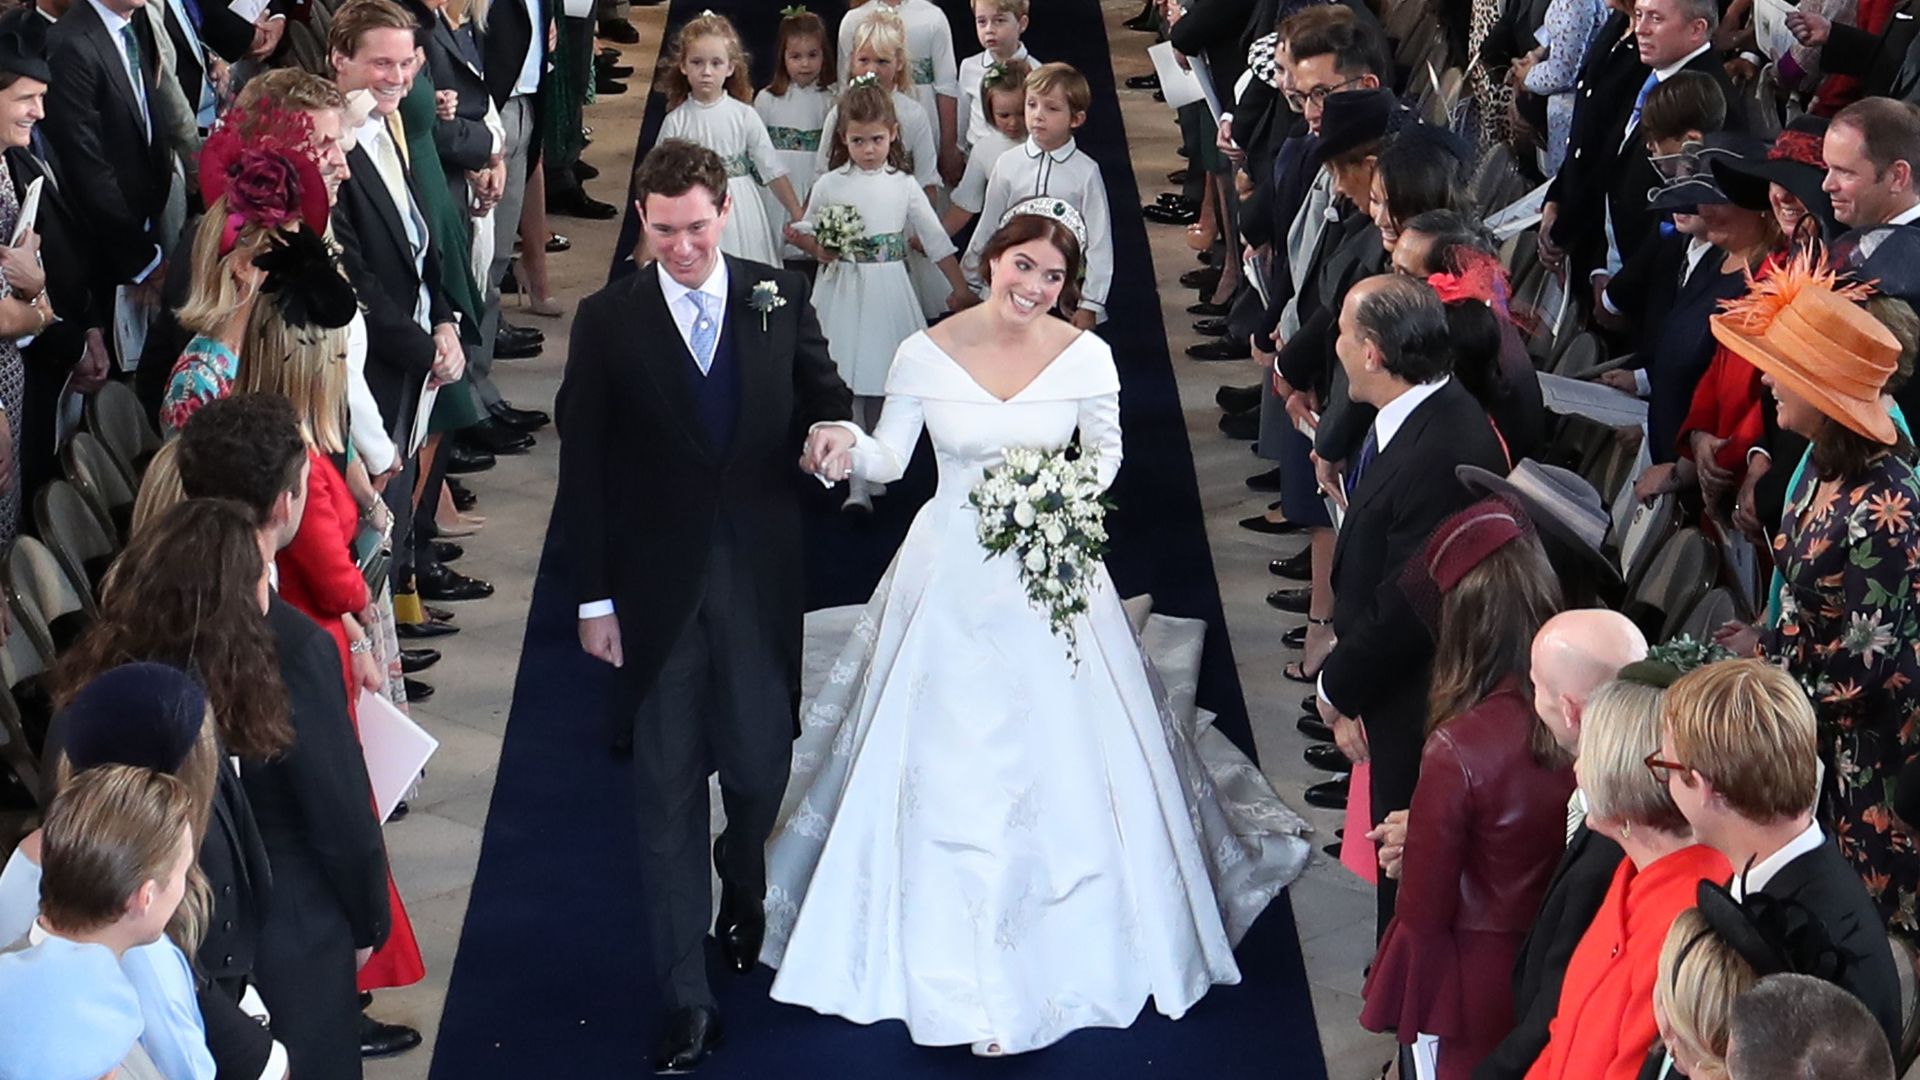 Princess Eugenie of York and Jack Brooksbank walk down the aisle following their marriage at St George's Chapel in Windsor Castle